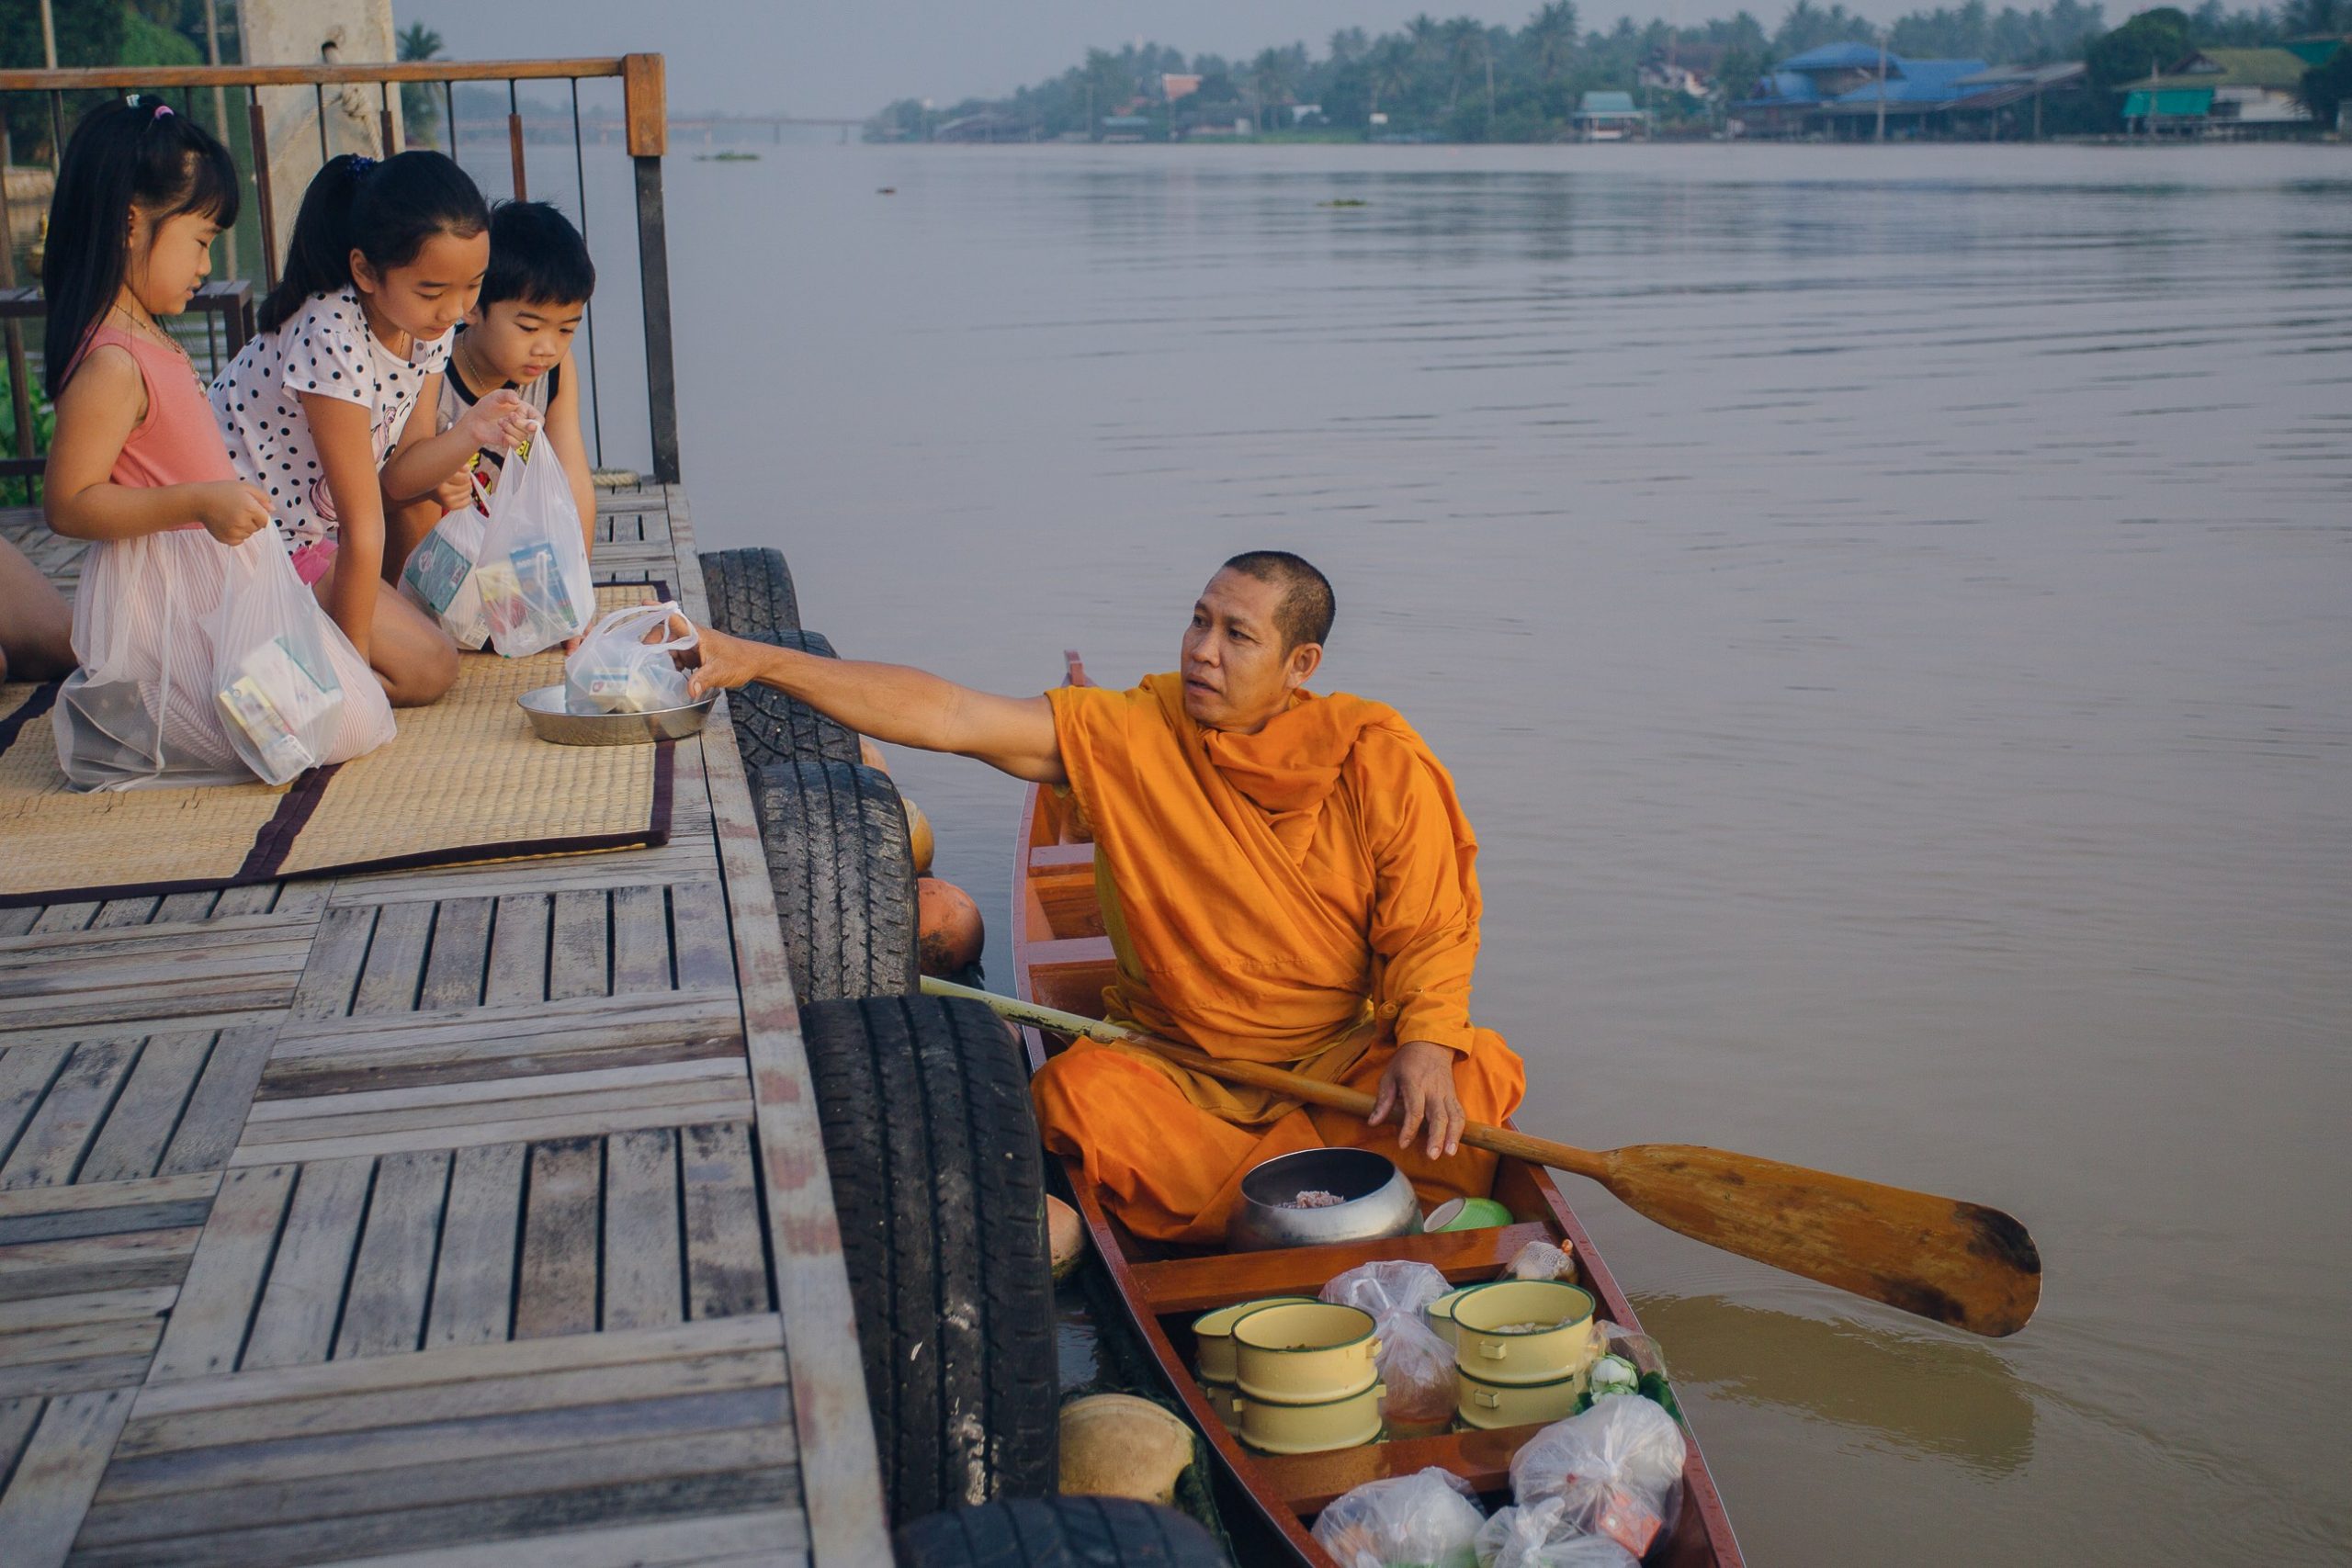 monk will paddle a boat for merit making